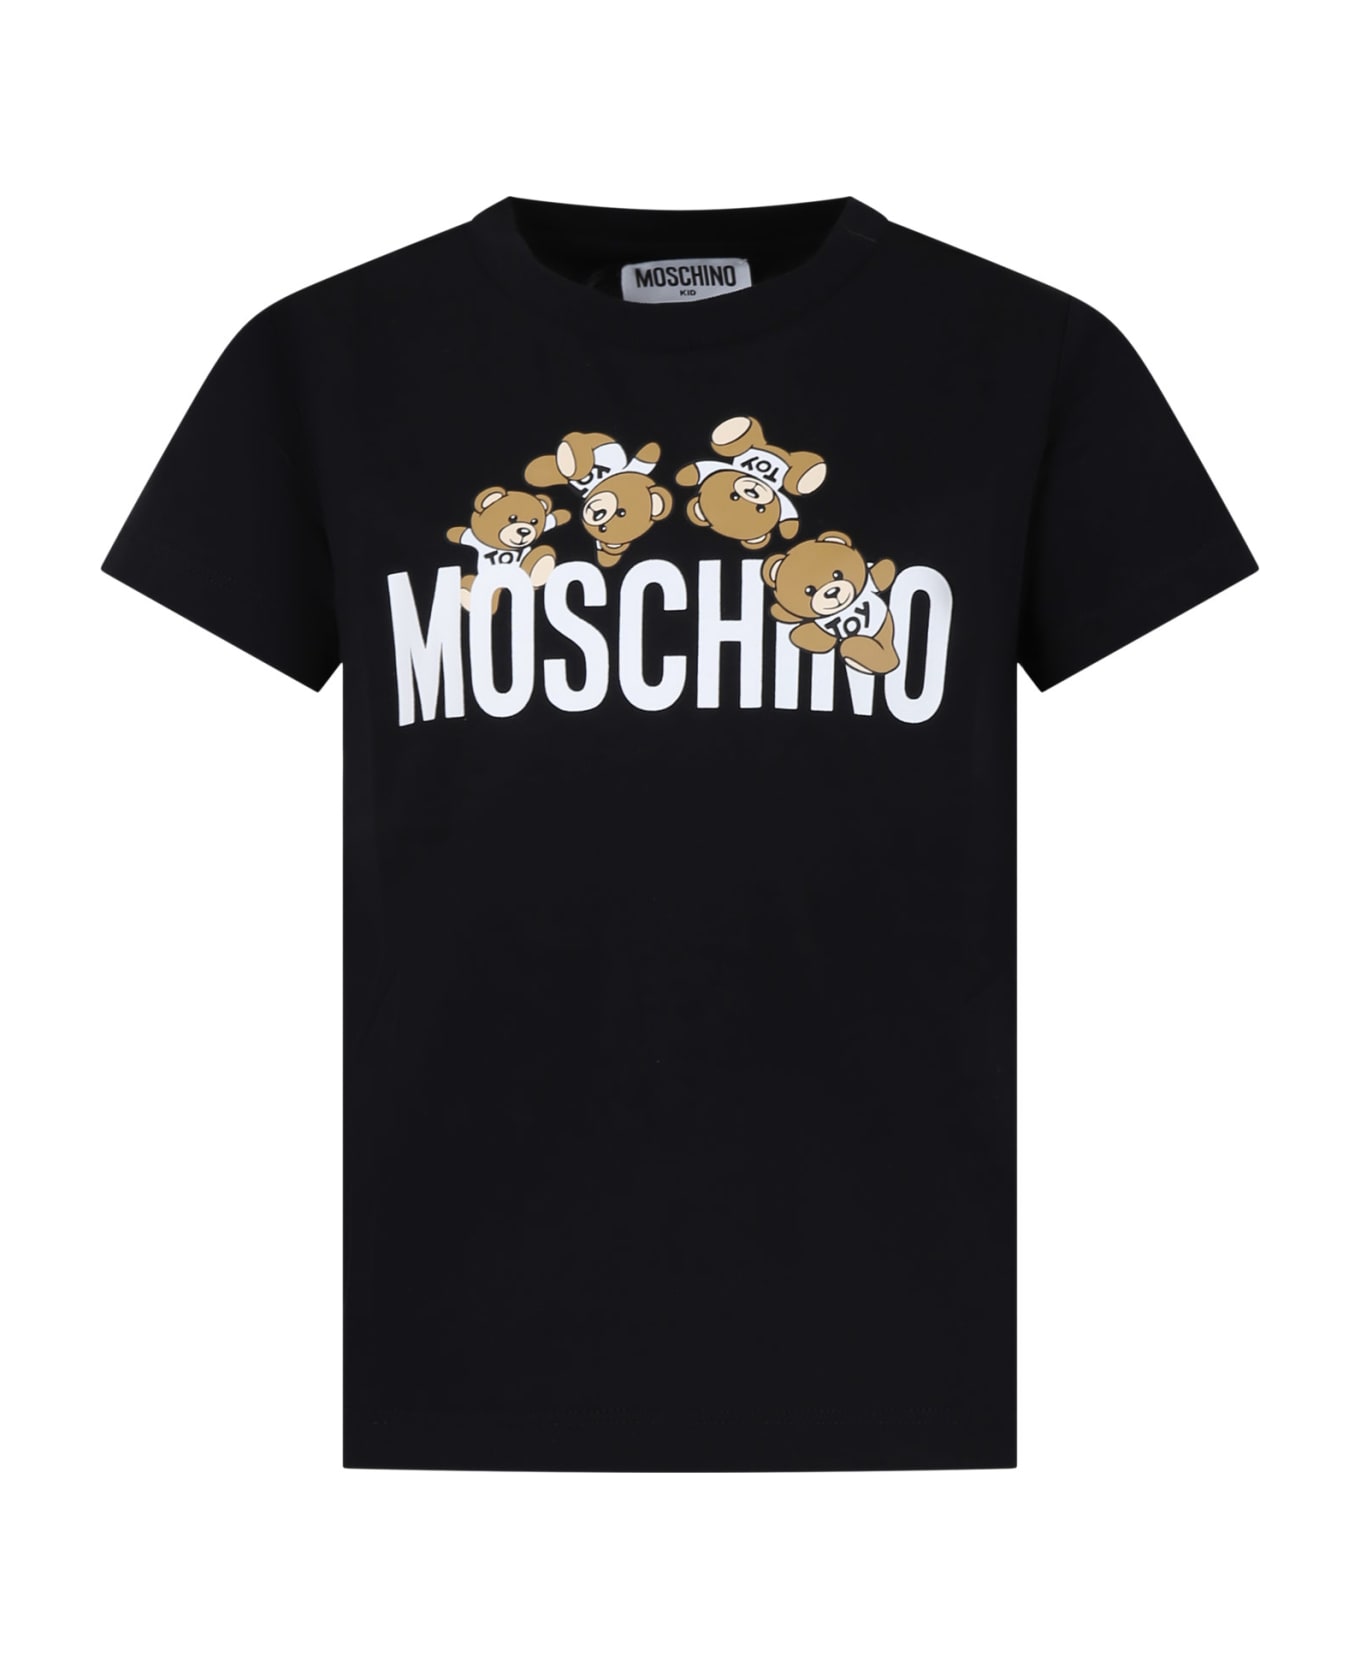 Moschino Black T-shirt For Kids With Logo And Teddy Bear - Black